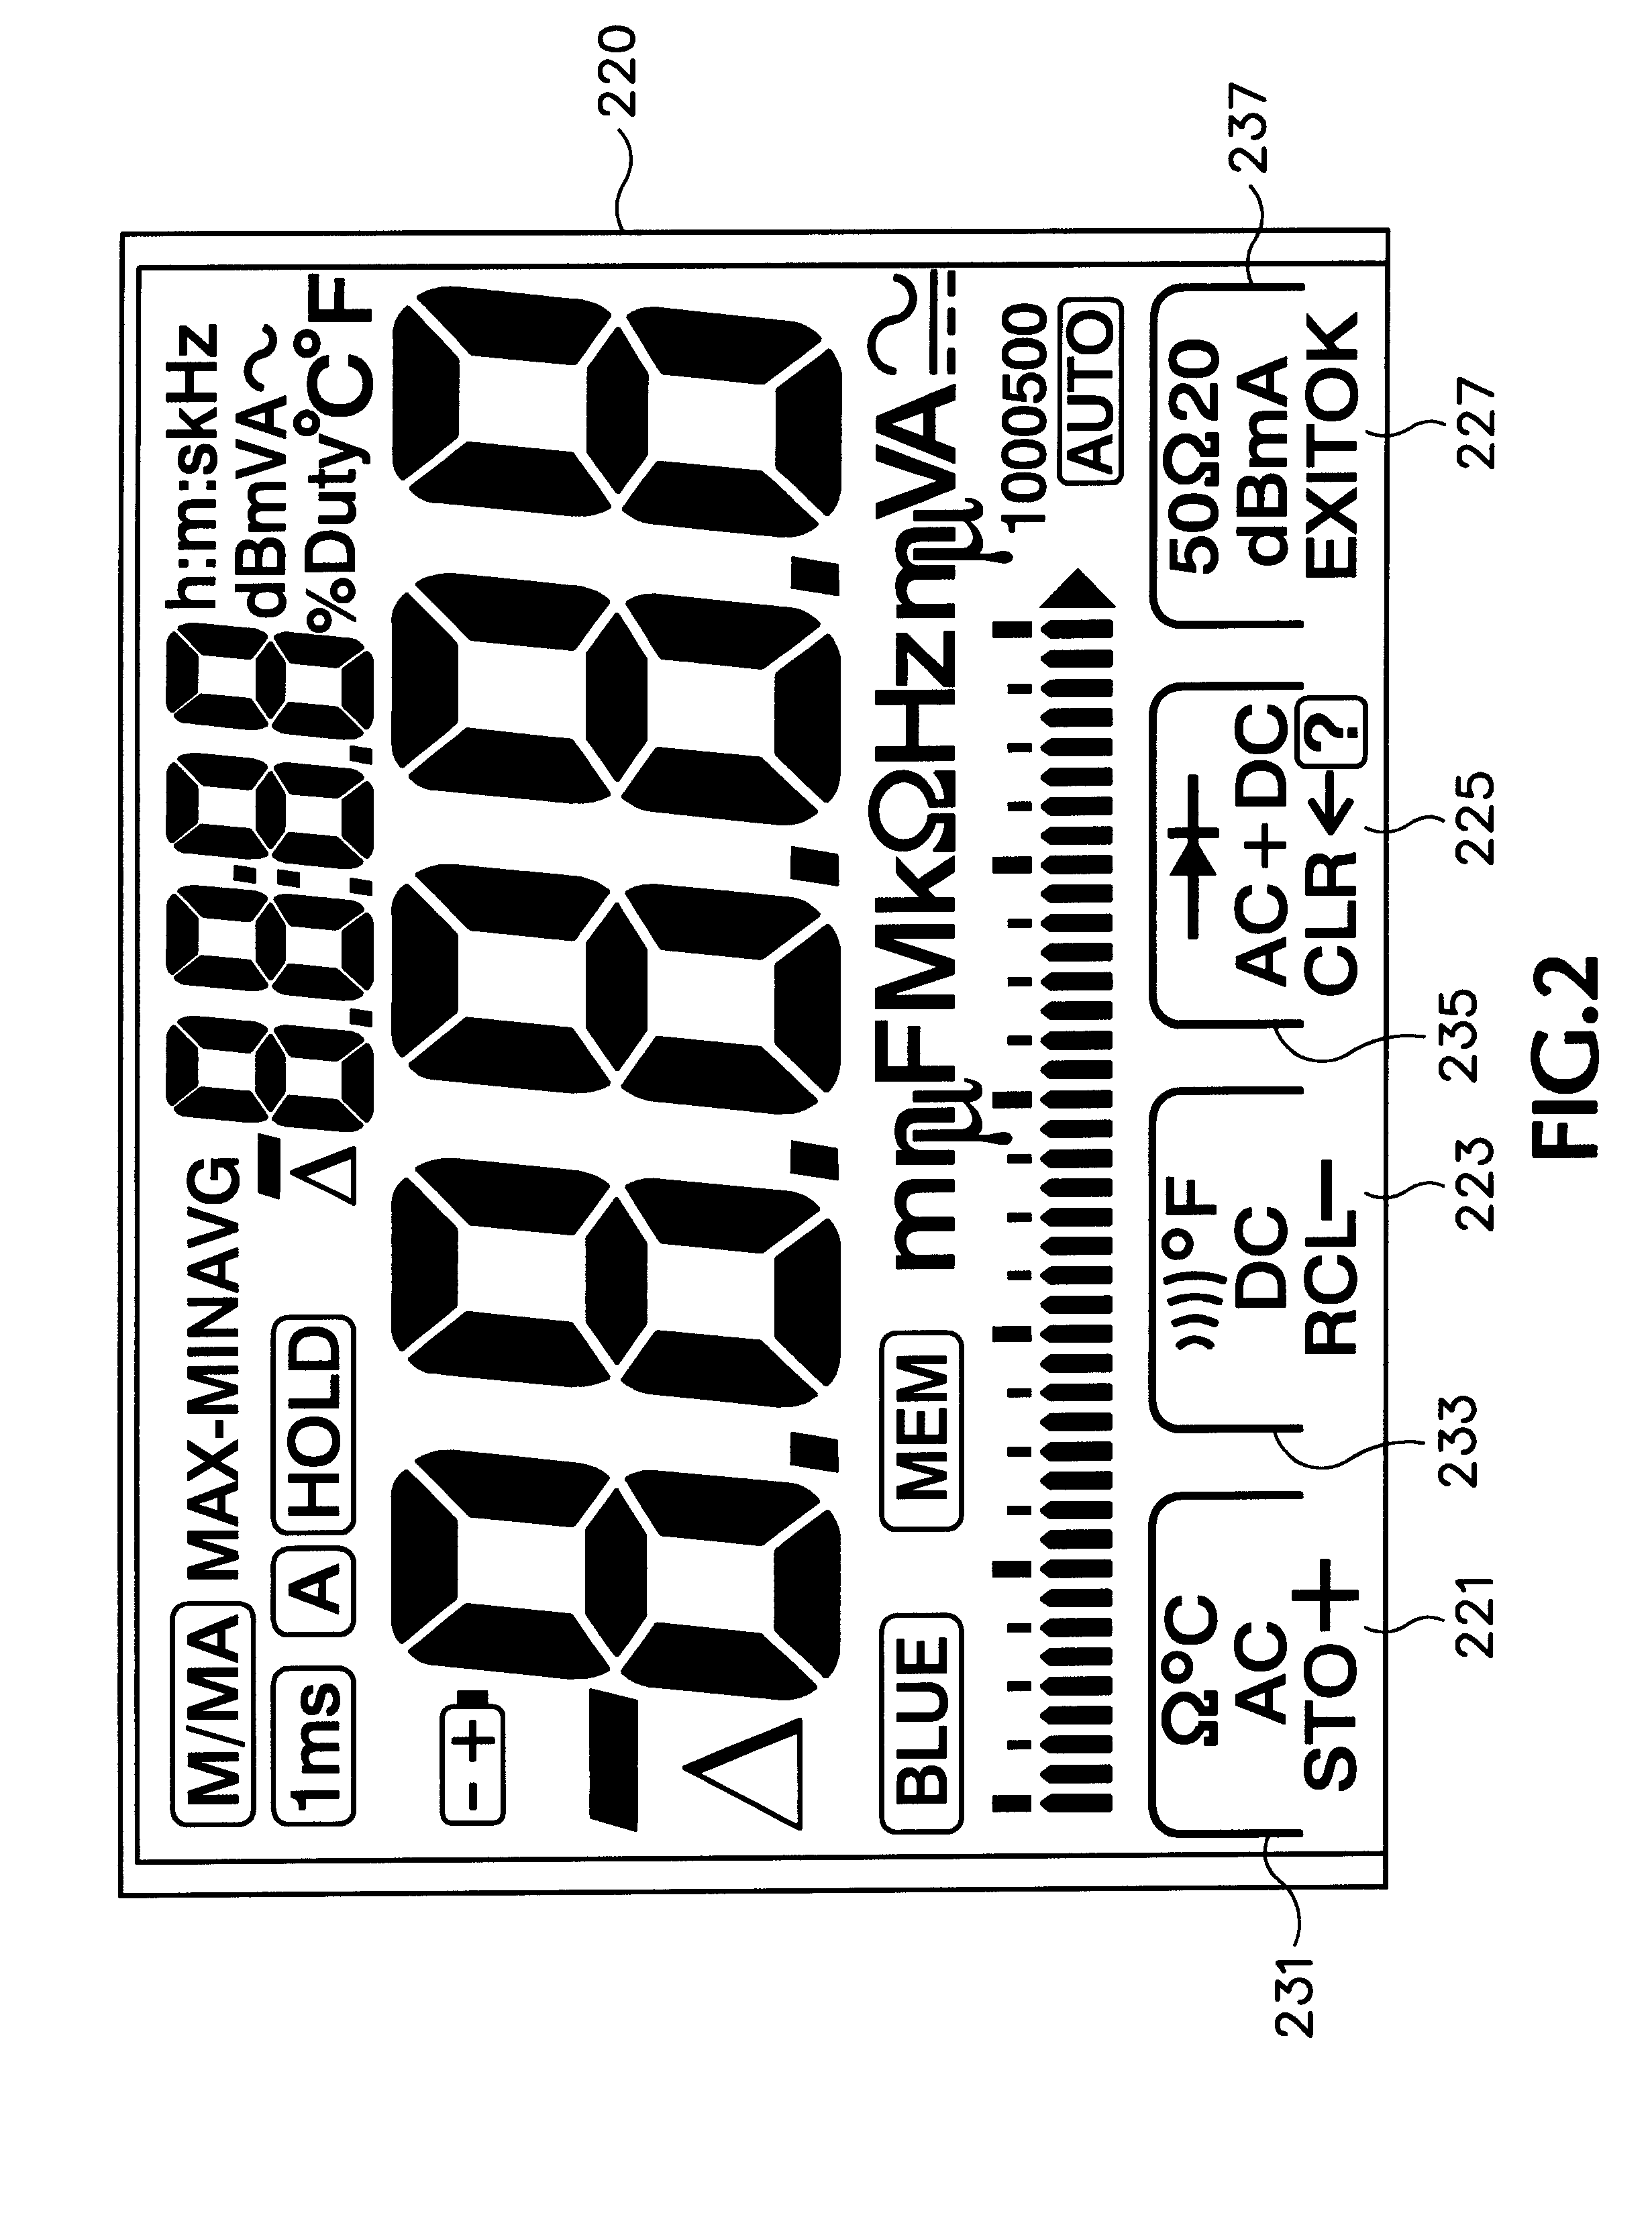 Simplified user interface and control system for a multimeter